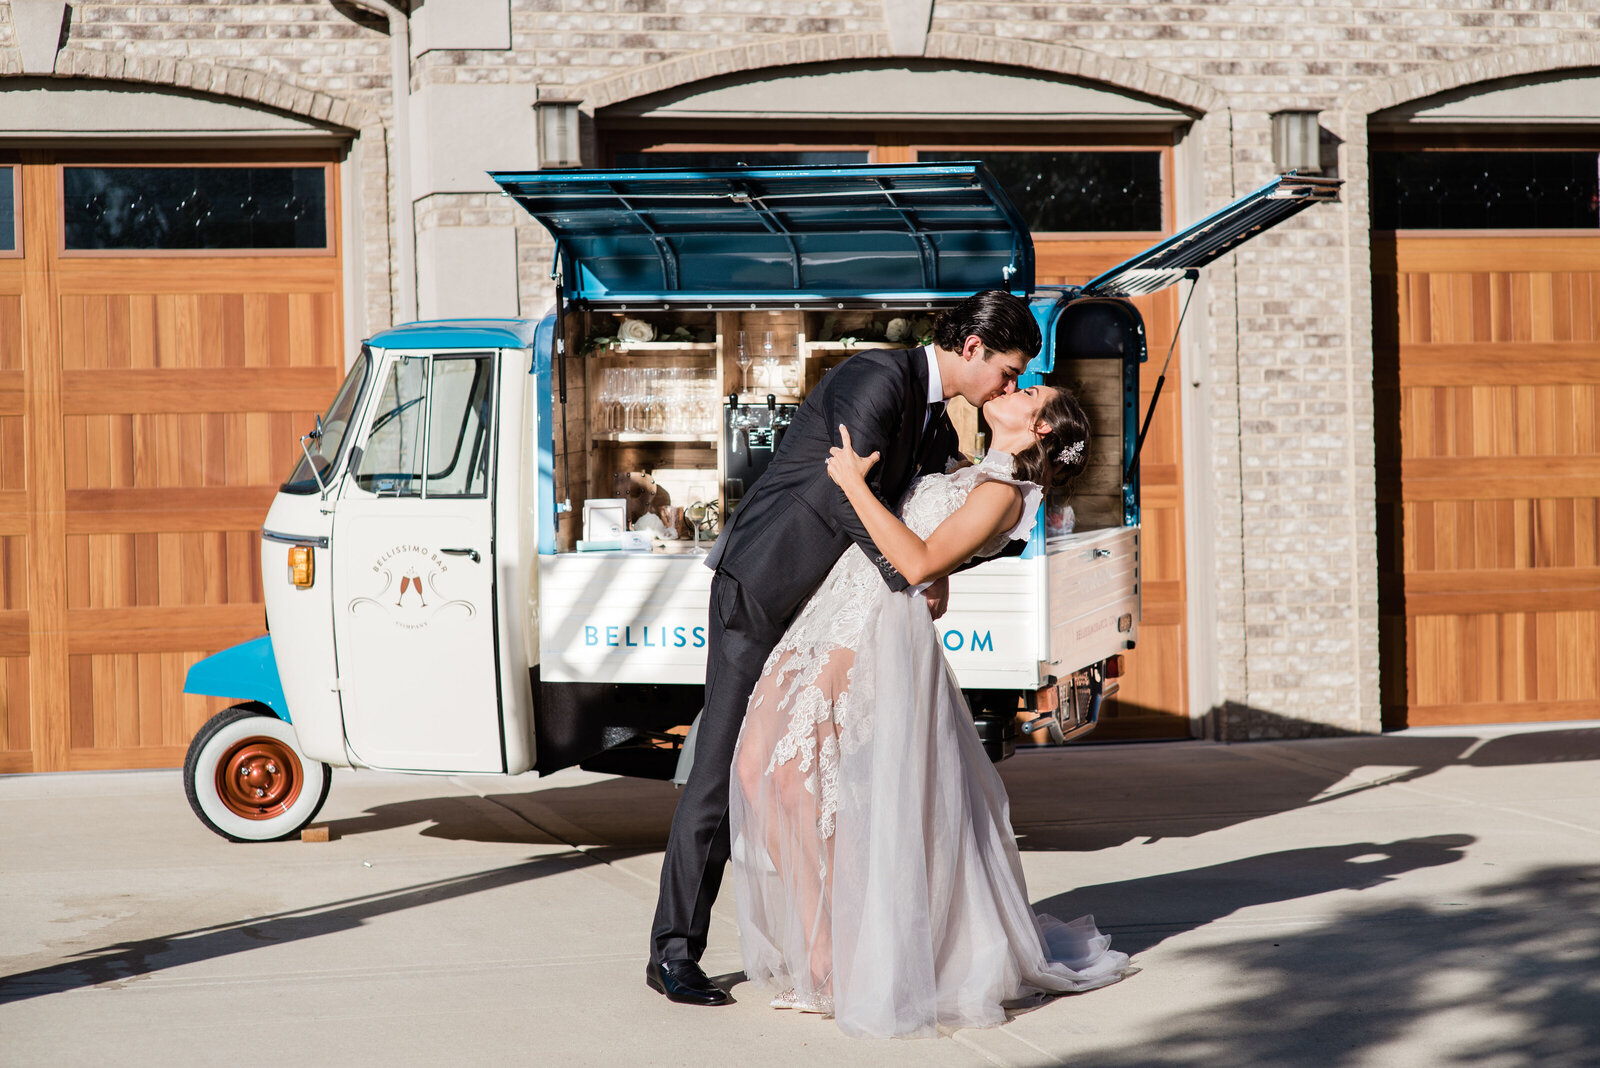 Bride and groom in front of mobile bar cart